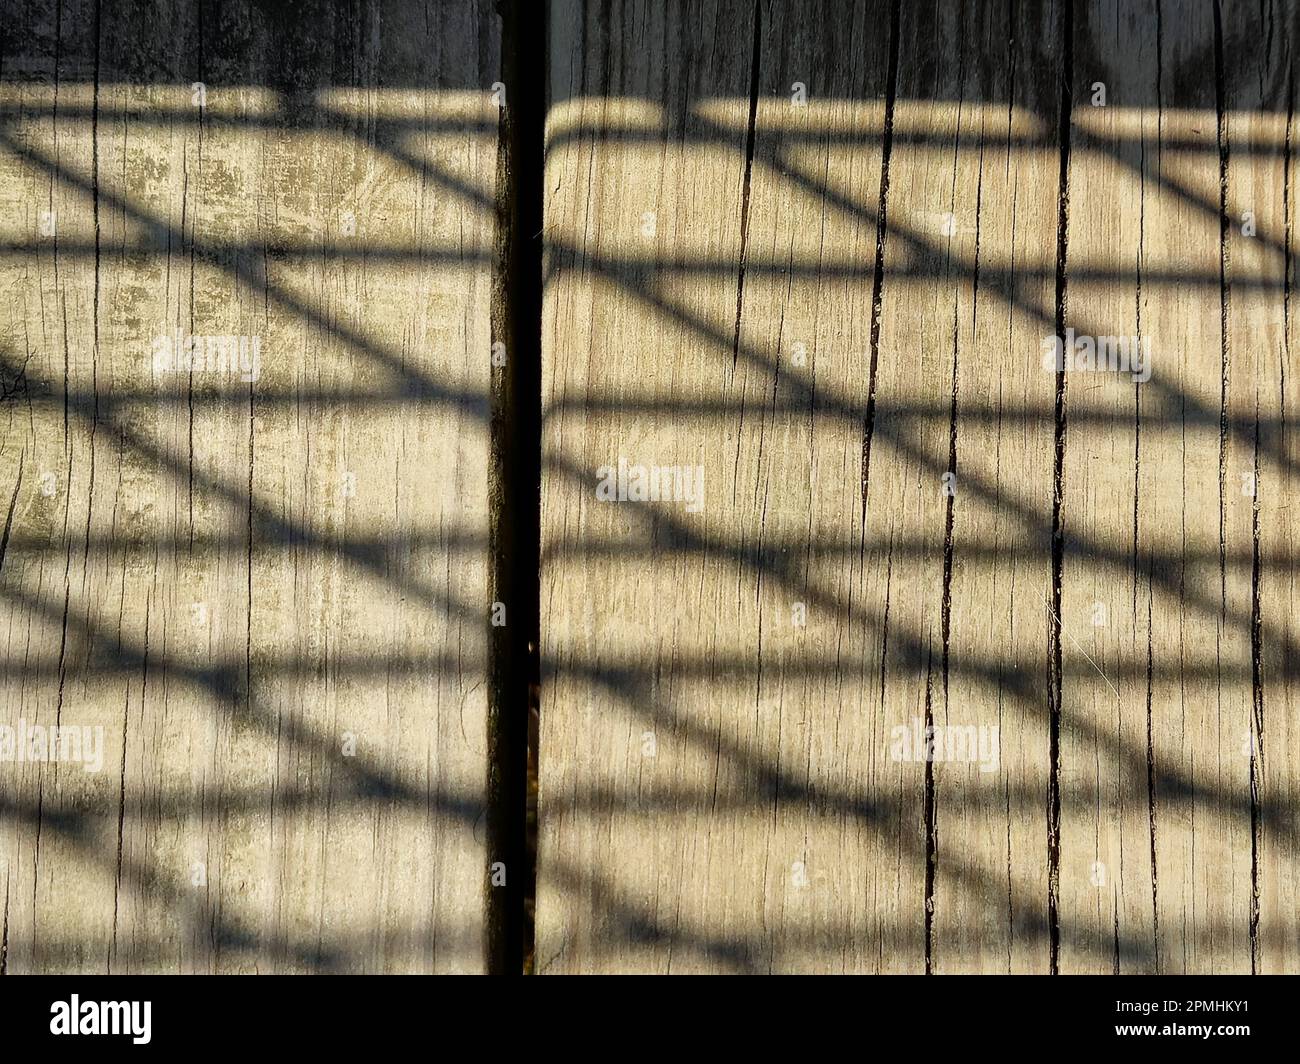 Close-up of lattice fence shadow pattern on brown weathered wood Stock Photo